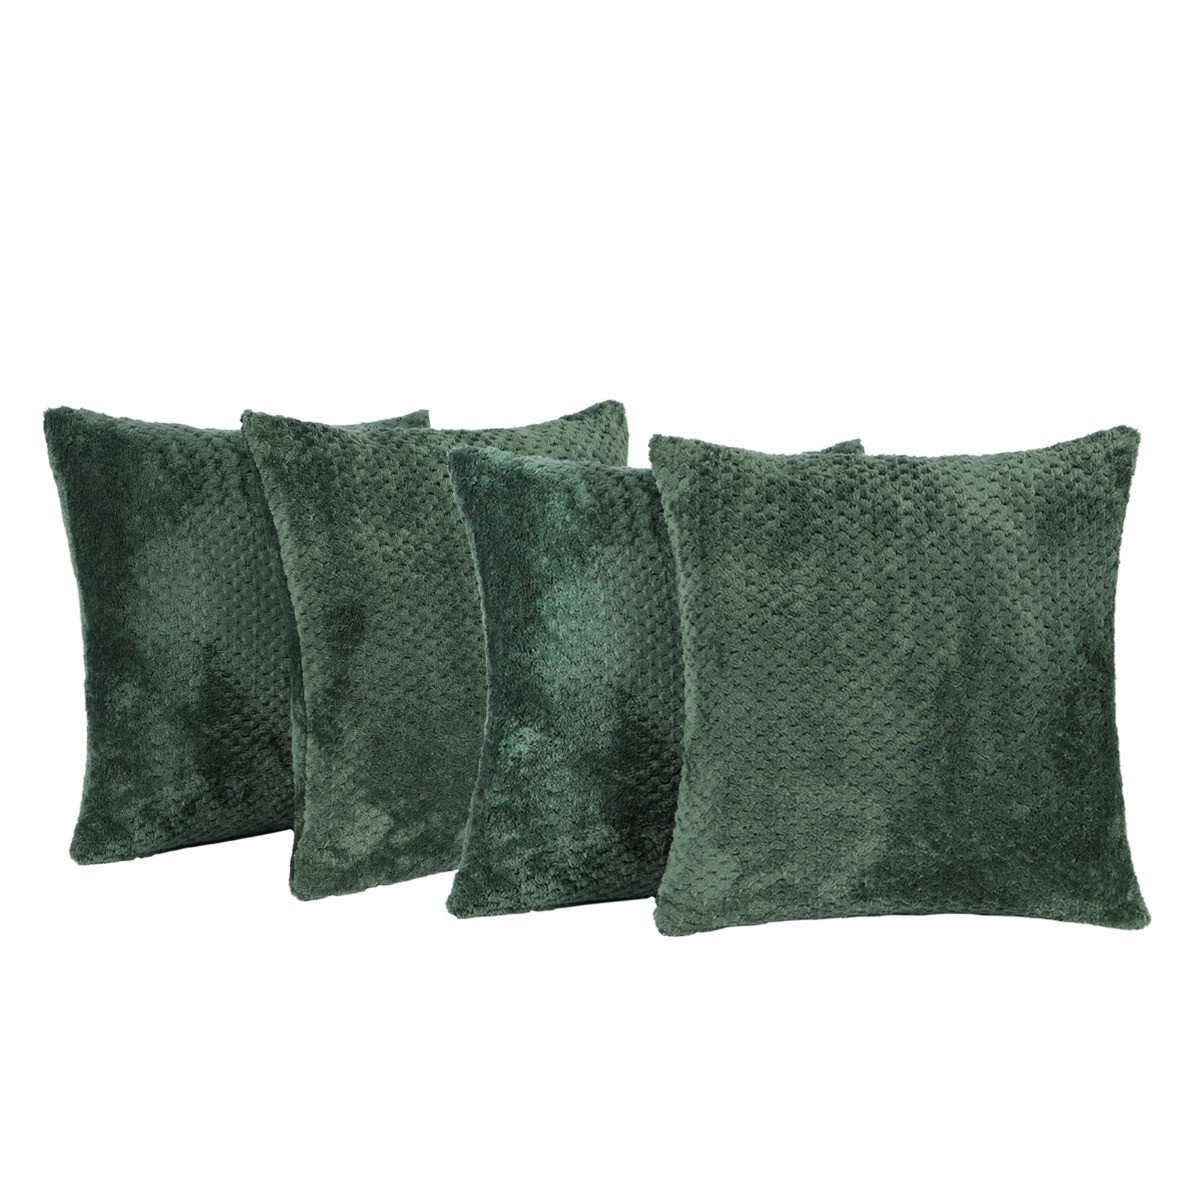 Brentfords 4 Pack Waffle Fleece Cushion Covers, Forest Green - 45 x 45cm>